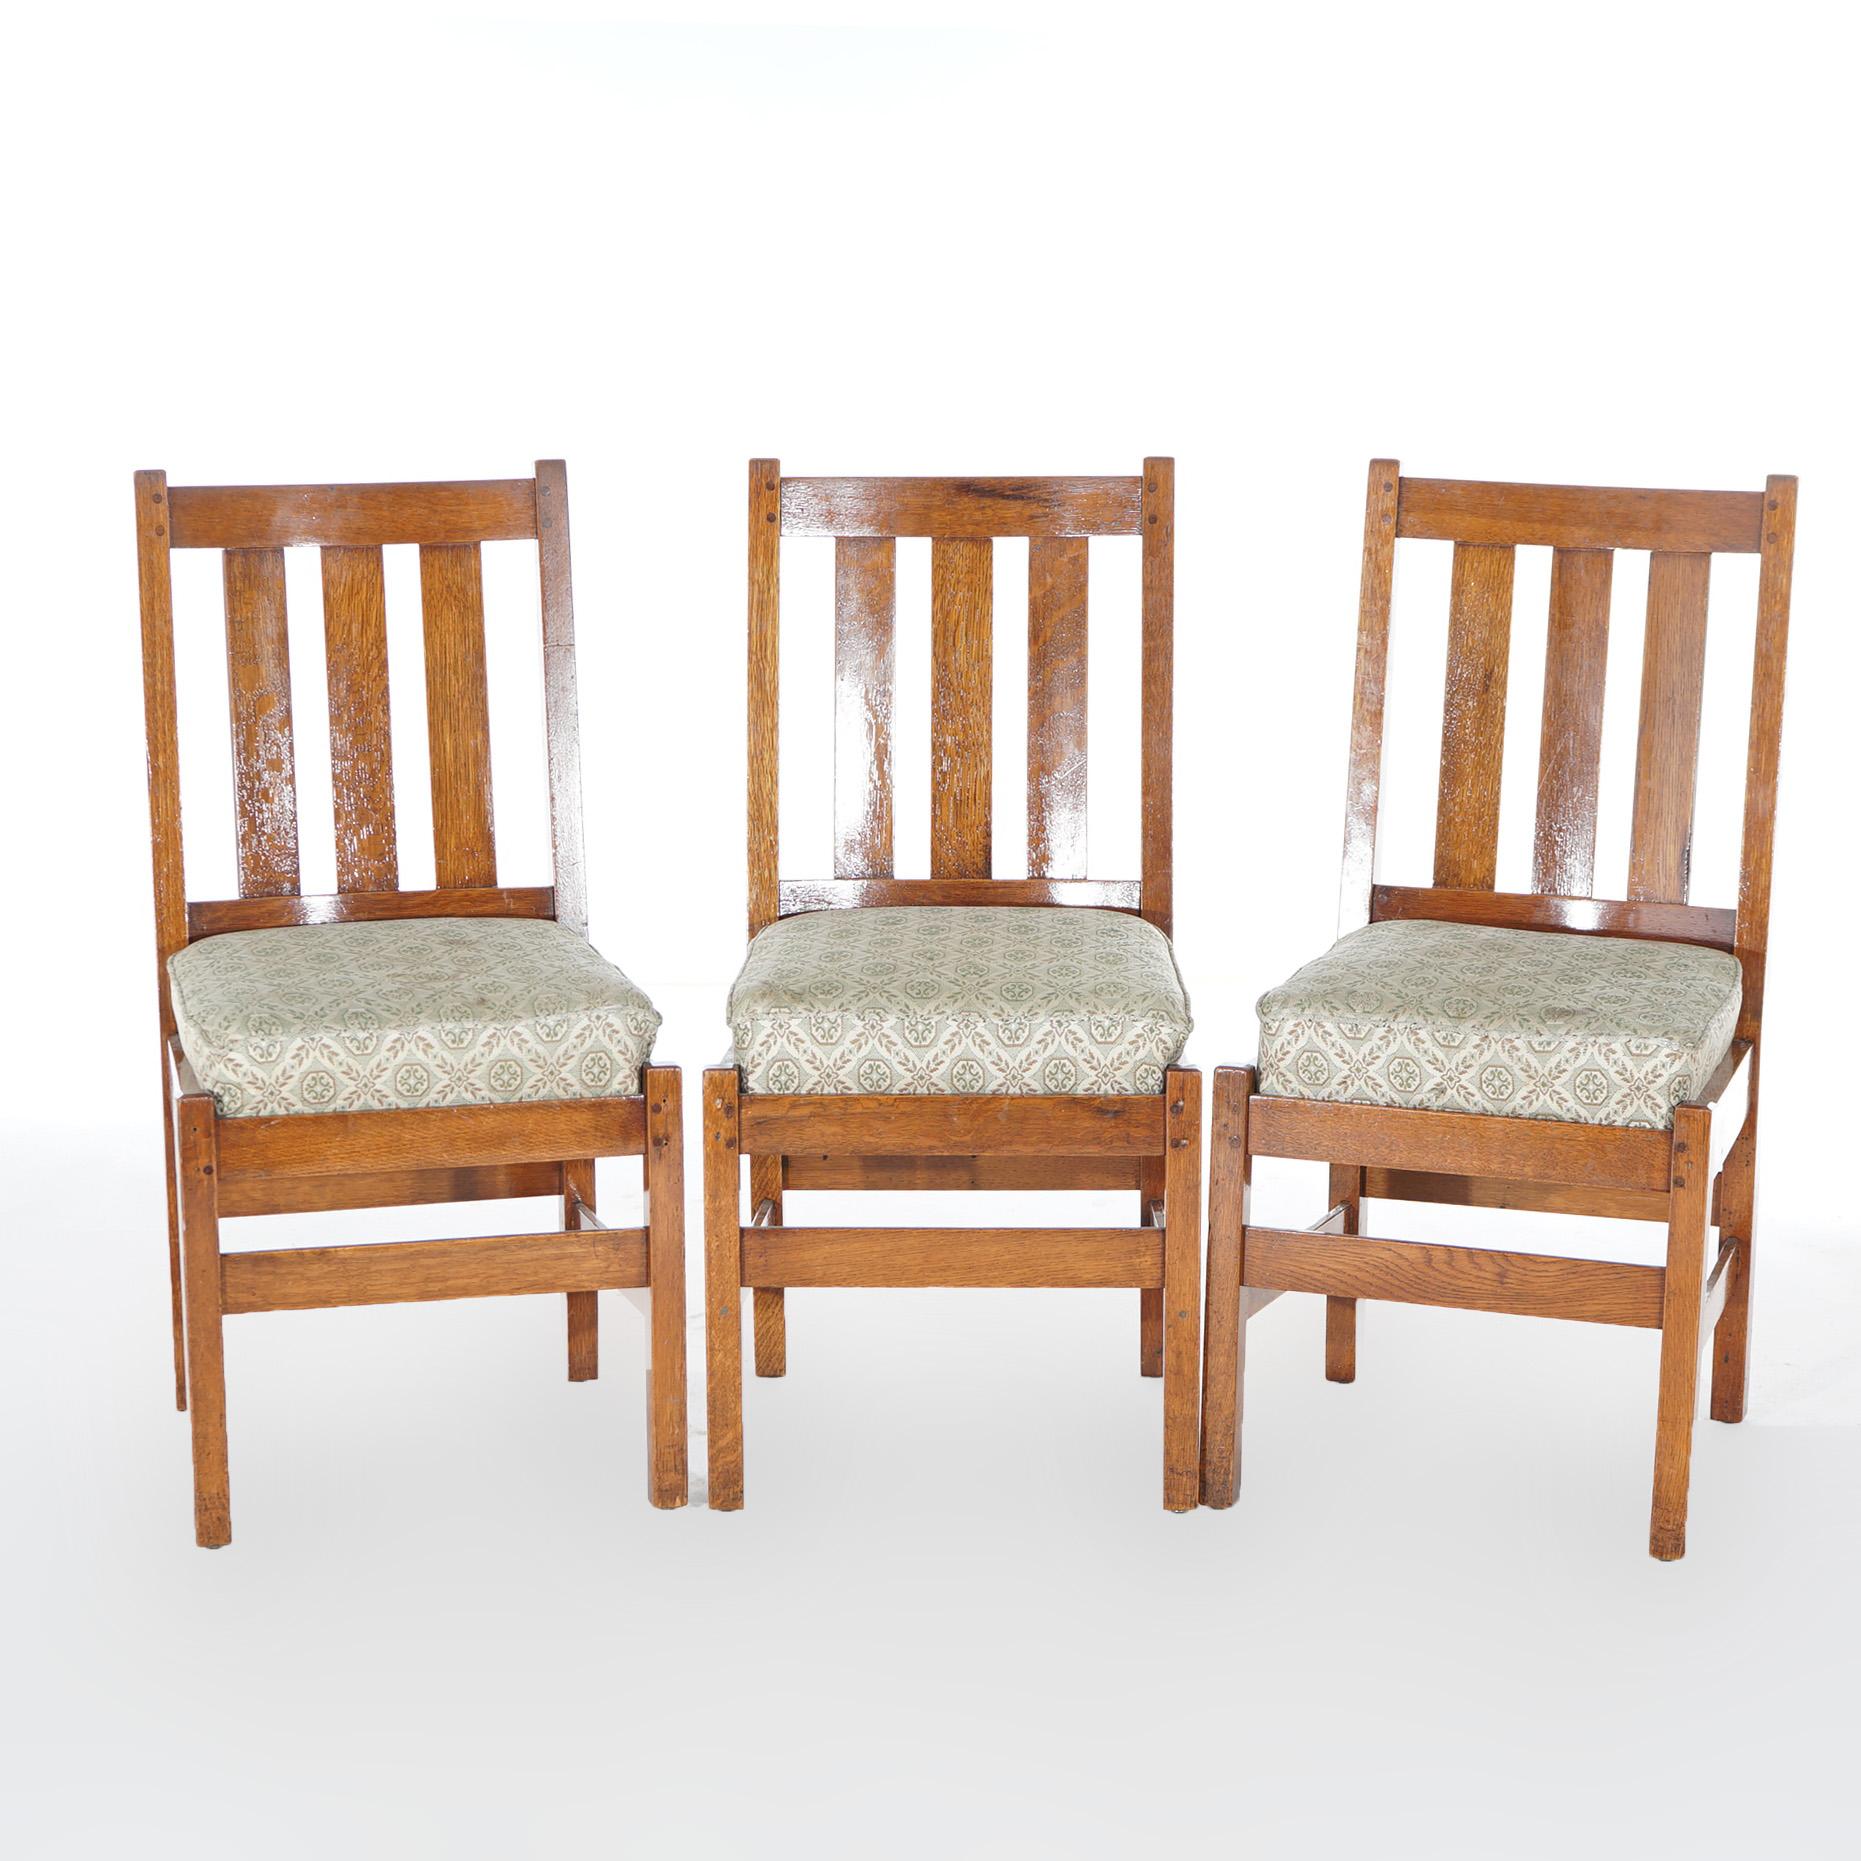 A set of three antique Arts and Crafts side chairs by L & JG Stickley offer oak construction with slat backs, upholstered seats and raised on straight square legs, c1910

Measure - 37